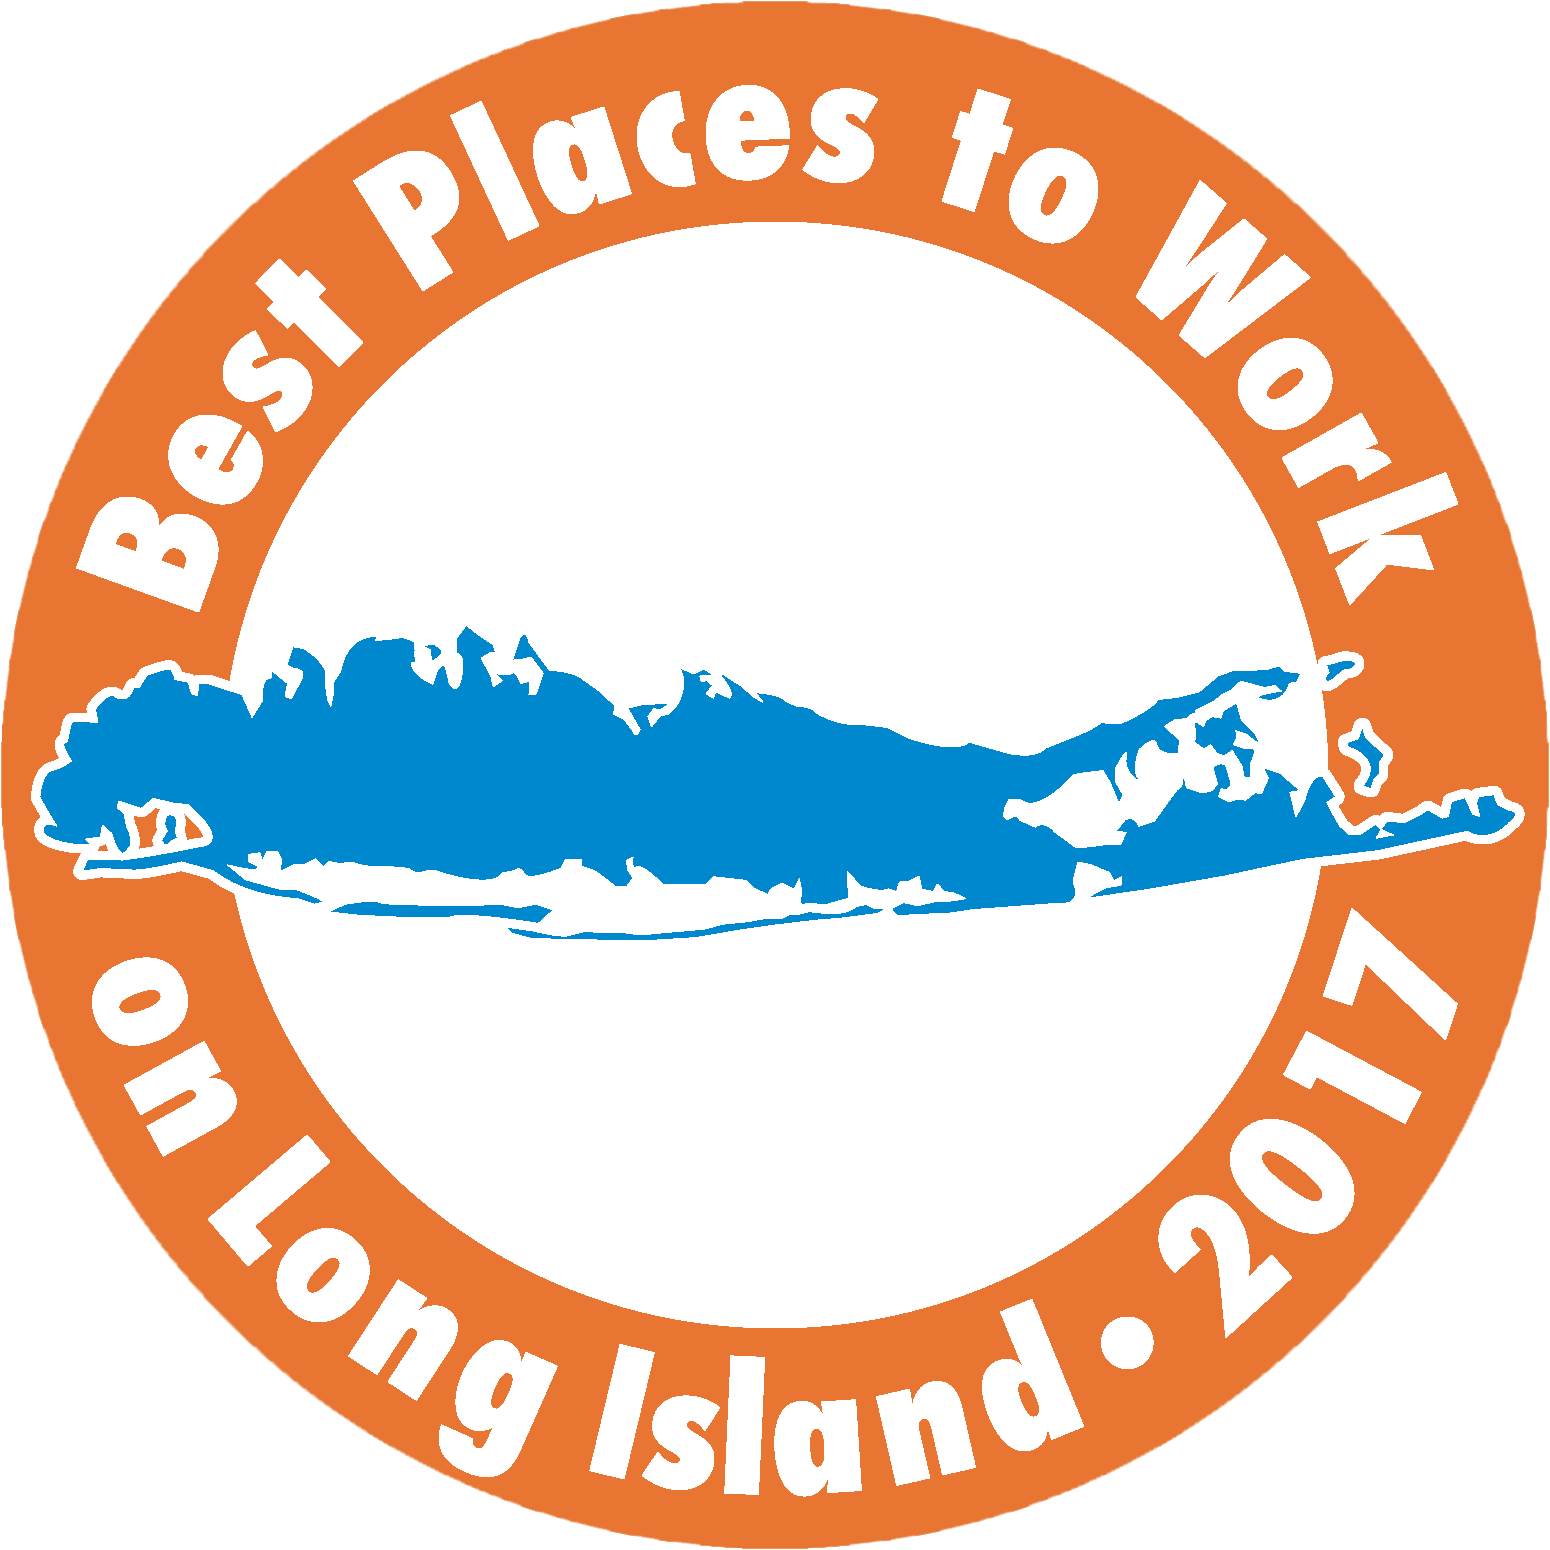 Best Places to work on Long Island 2017